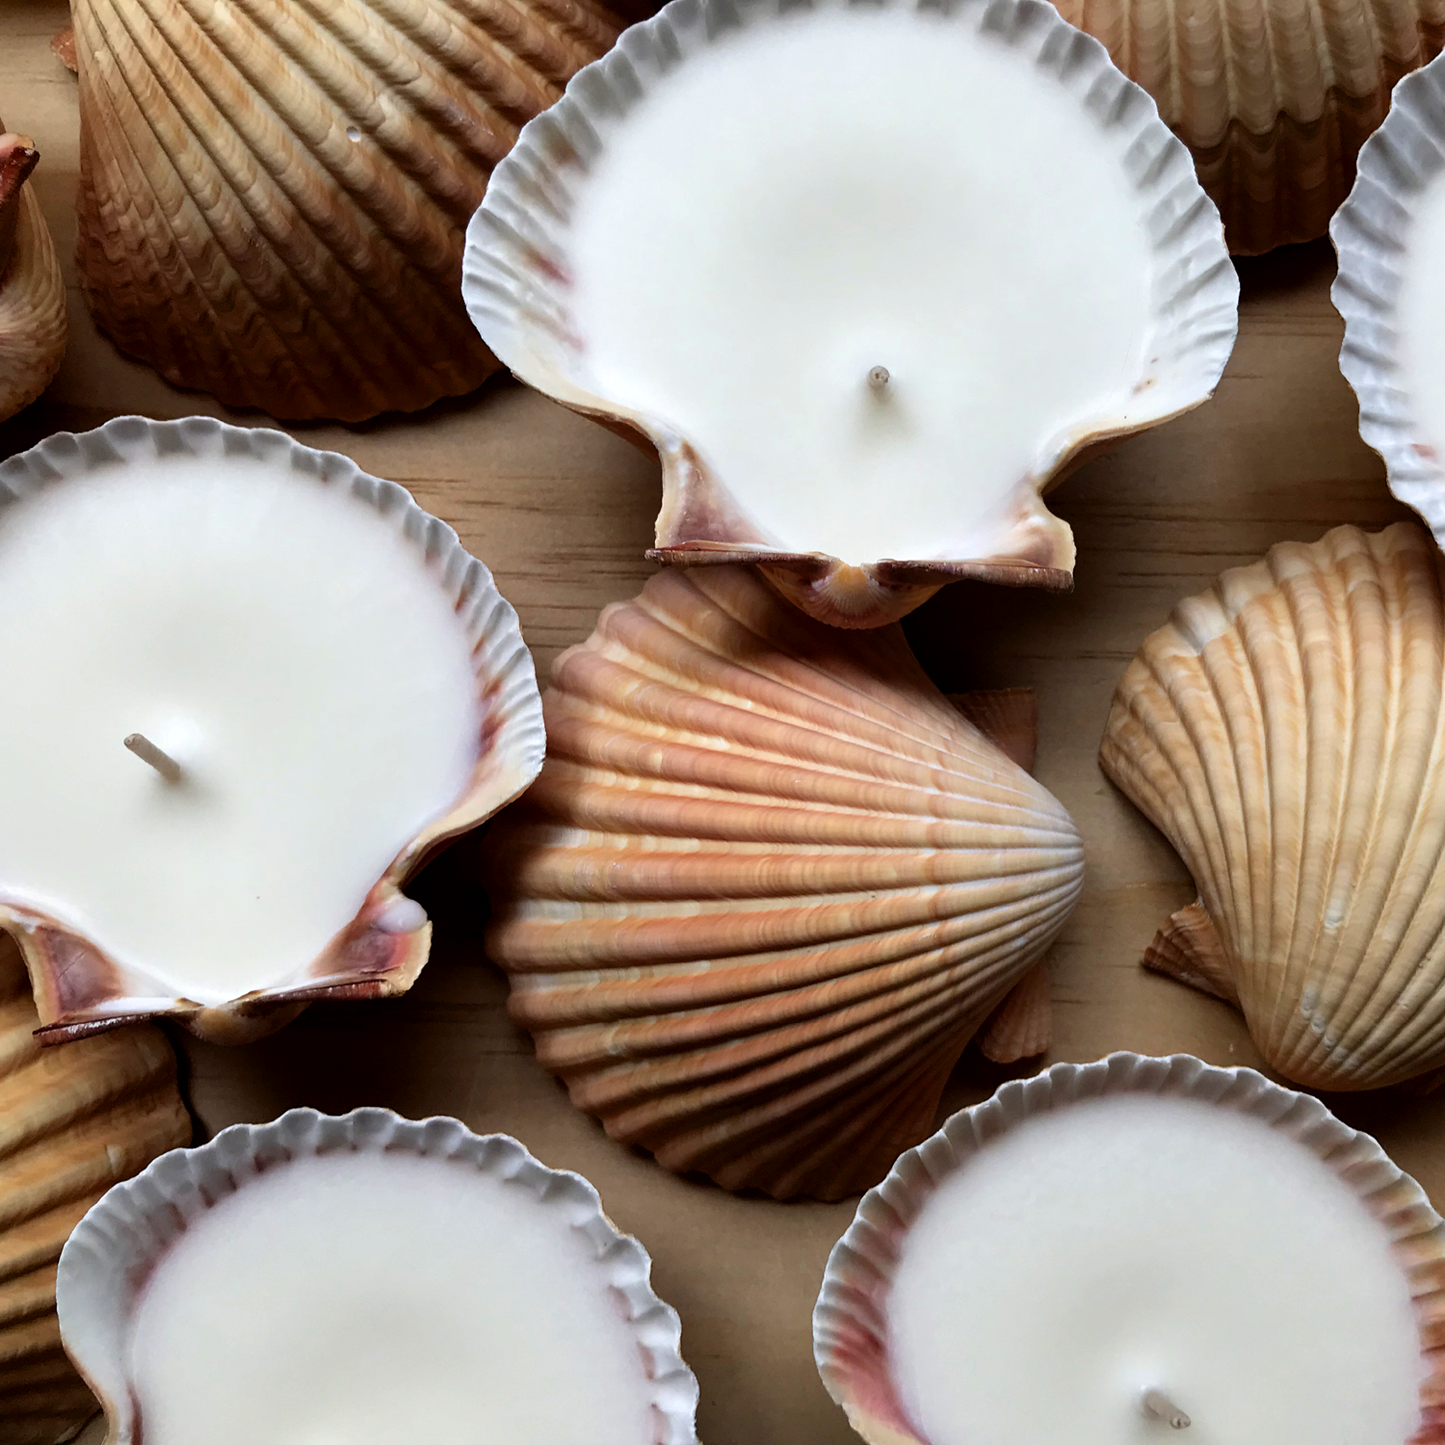 Shell Candle | I Love You Message | Scallop | Hunter Gatherer